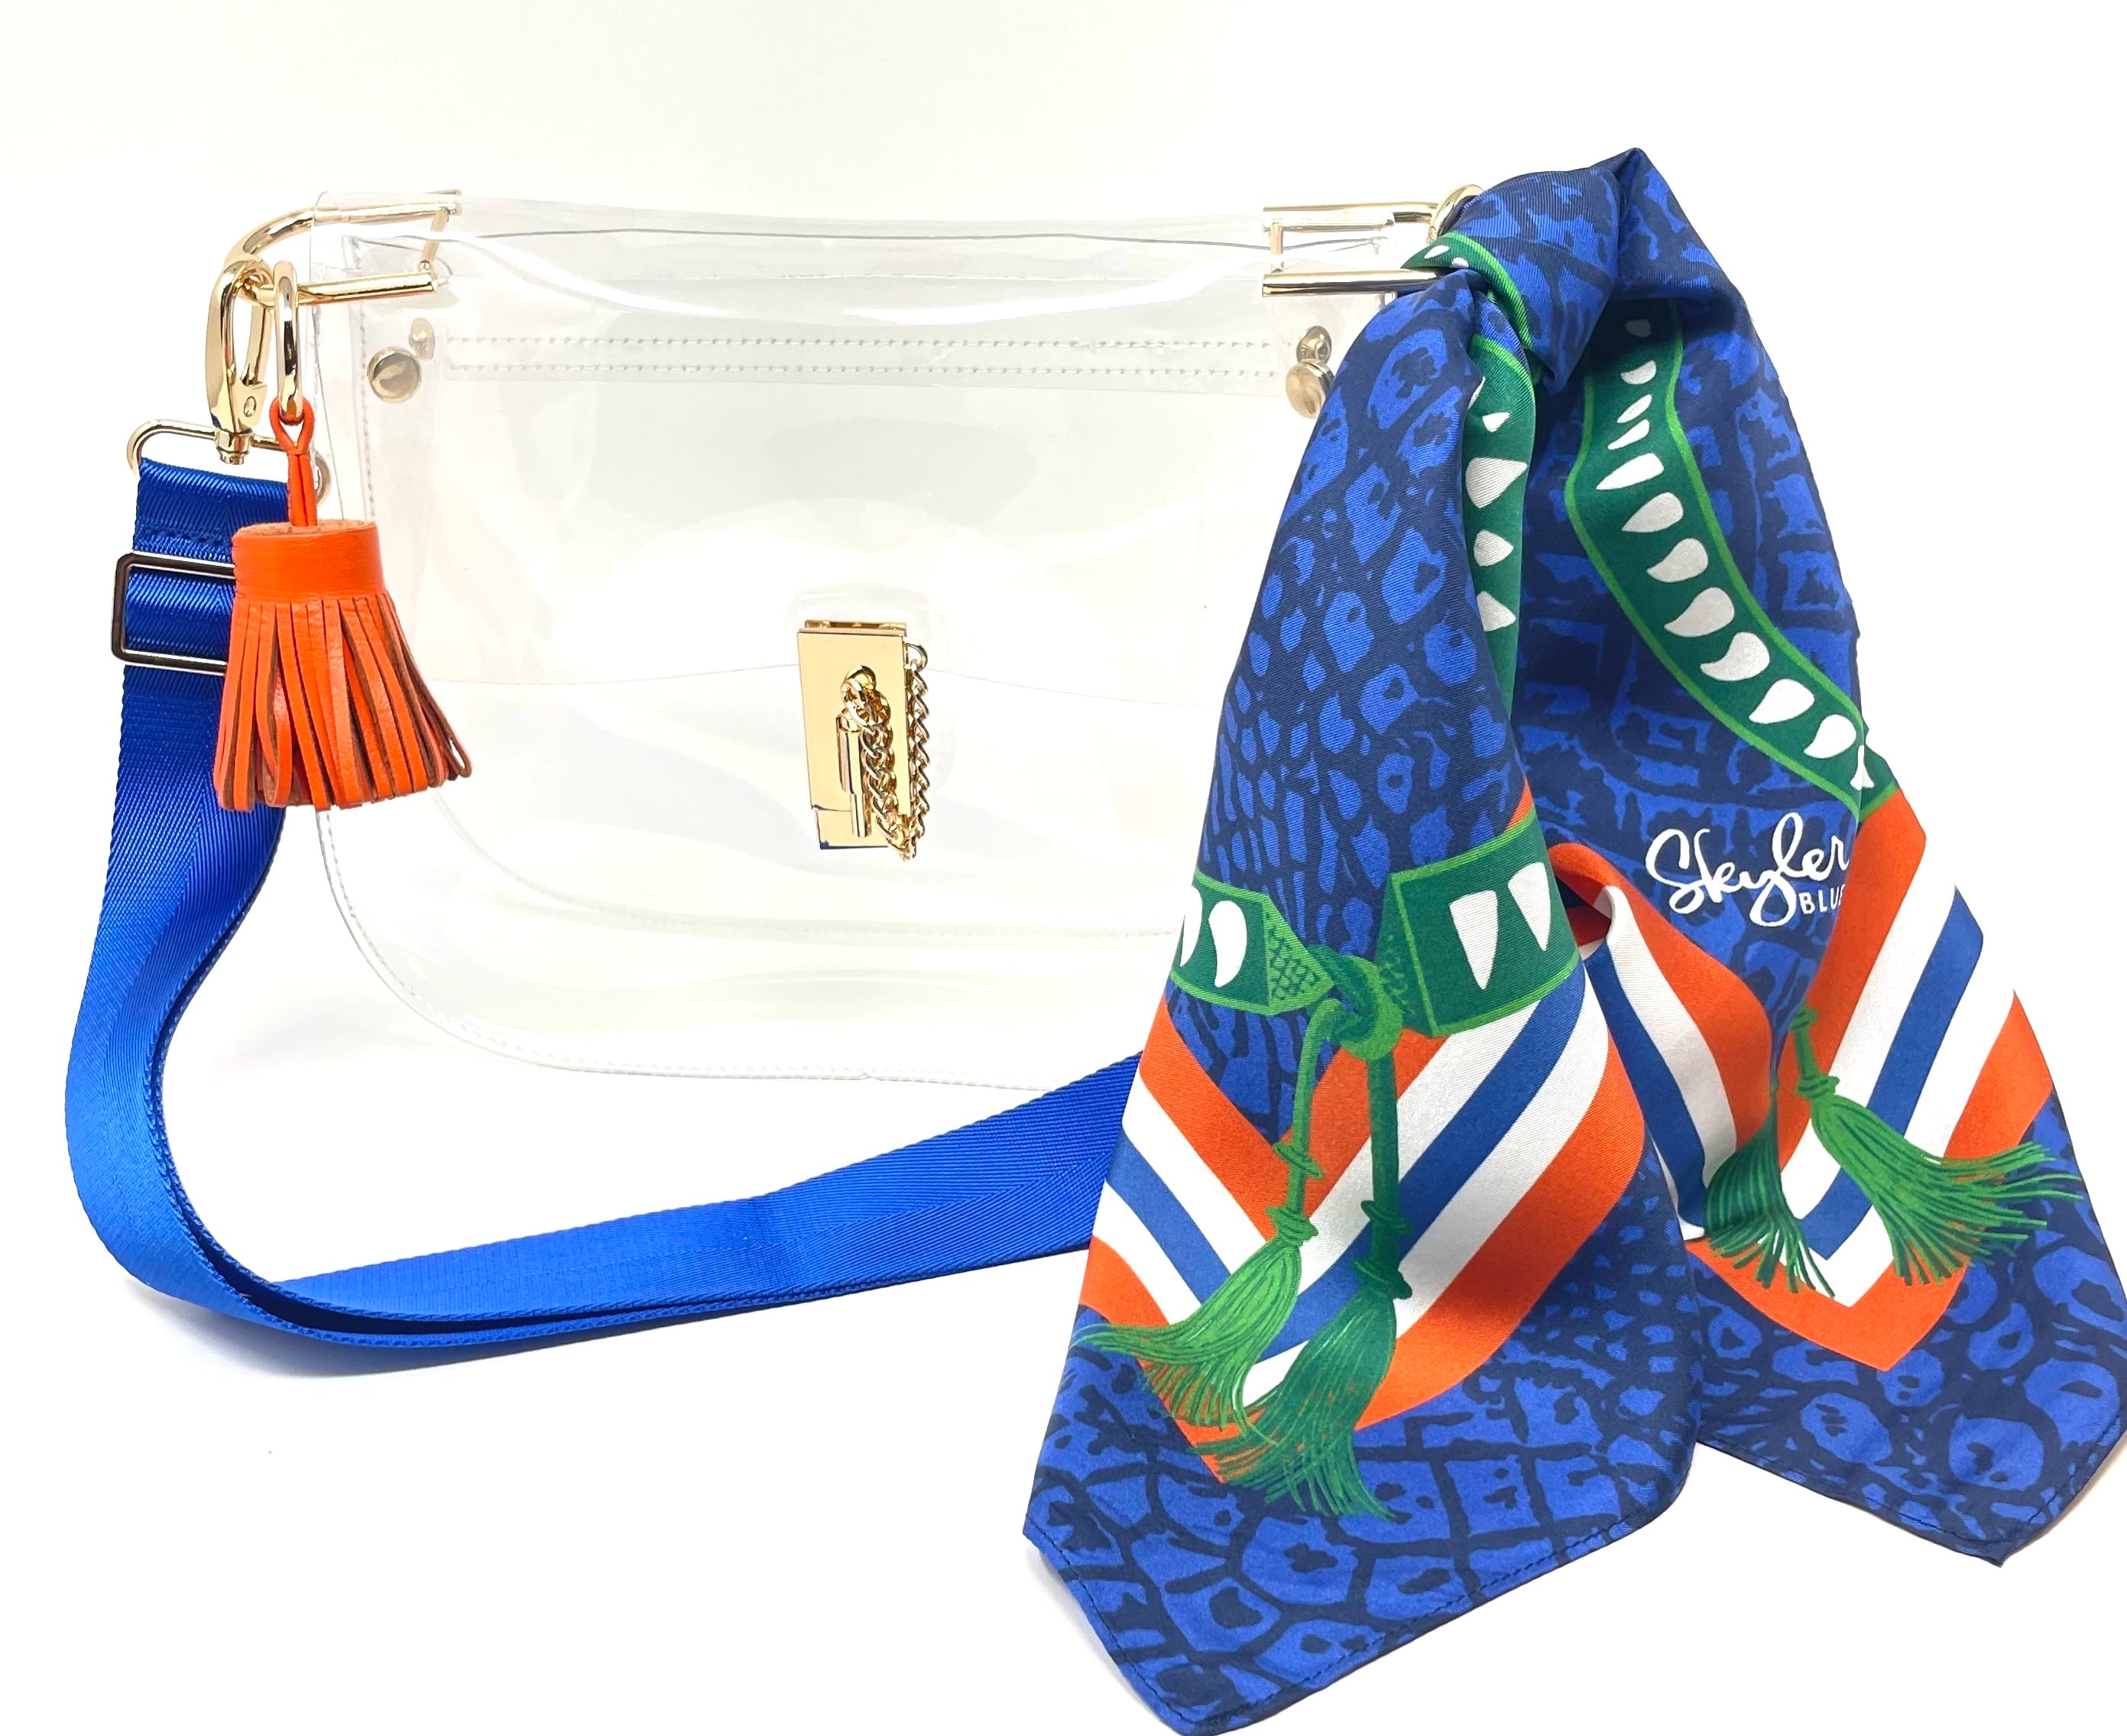 Skyler Blue’s The Gainesville Medium Saddle Clear Bag stadium approved clear bag / clear purse including adjustable, nylon webbing shoulder or crossbody strap with herringbone weave and gold hardware, 60-centimeter 100% silk twill scarf, and 100% genuine leather tassel. 